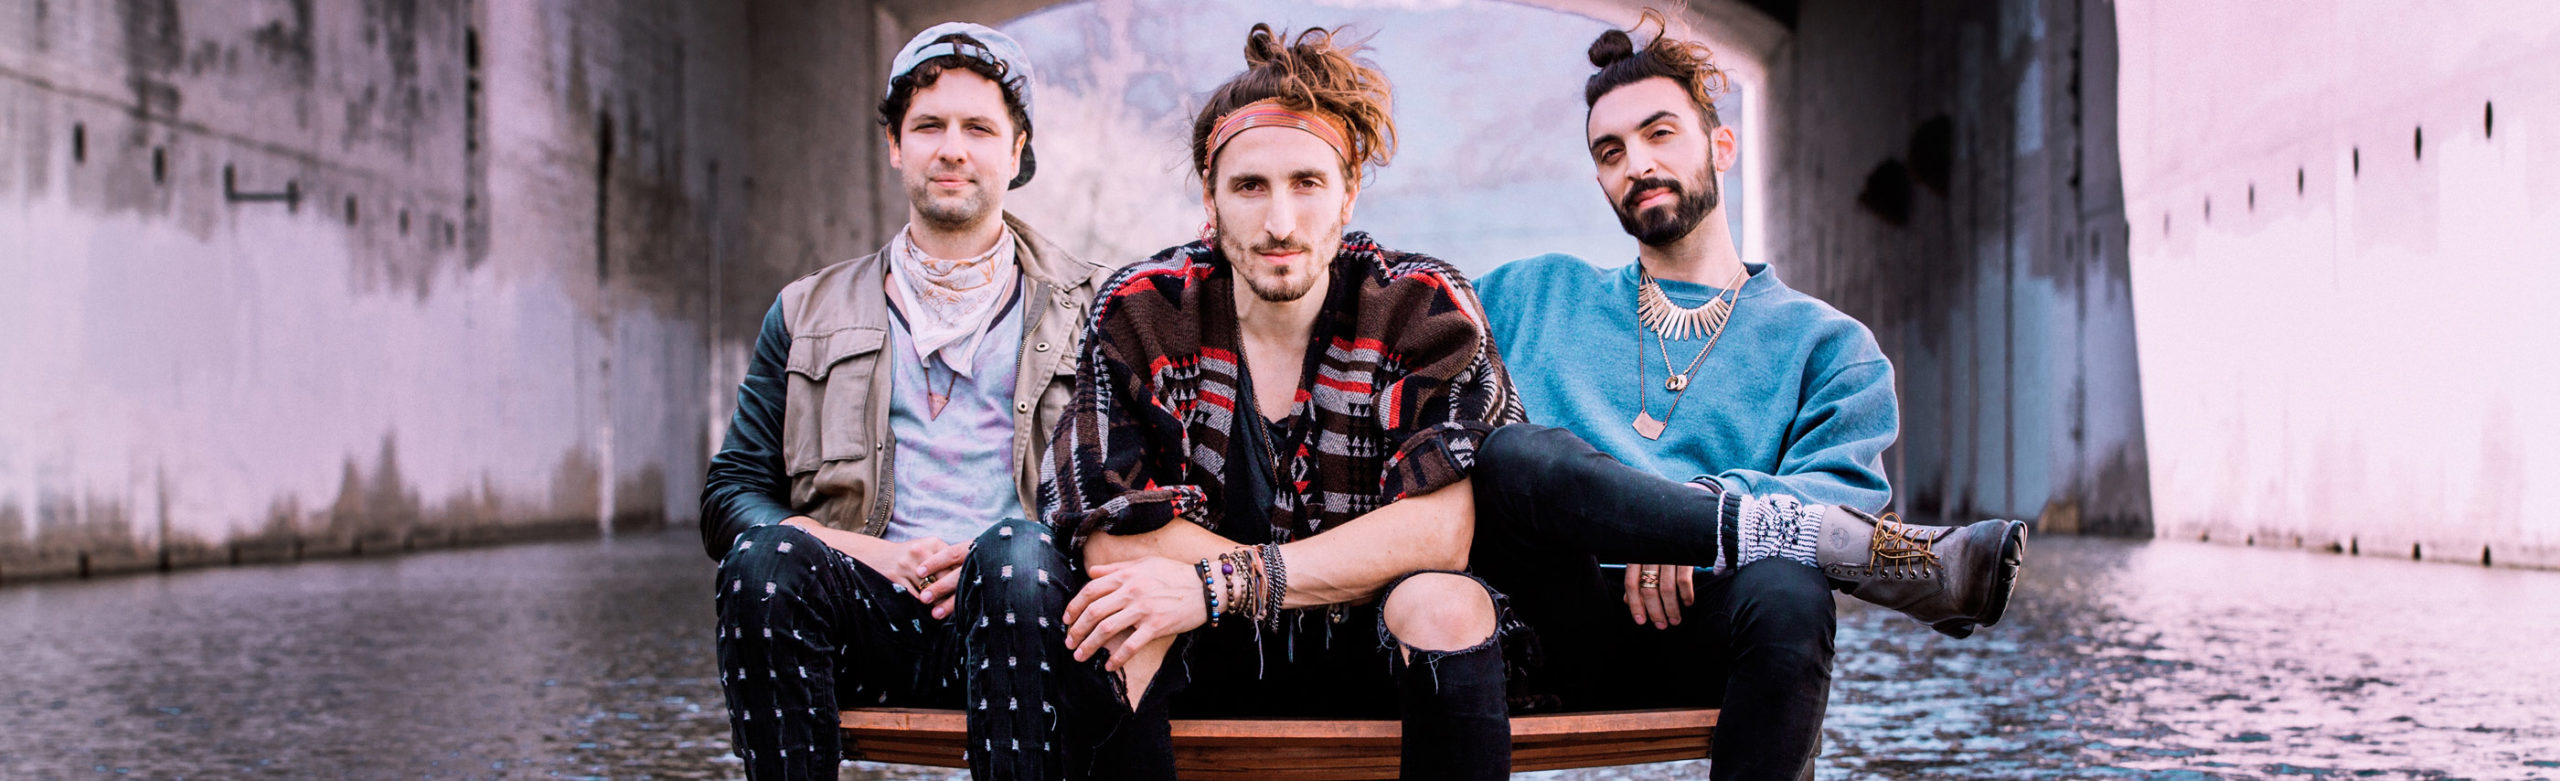 Upbeat Indie Folk: Magic Giant to Perform in Missoula Image